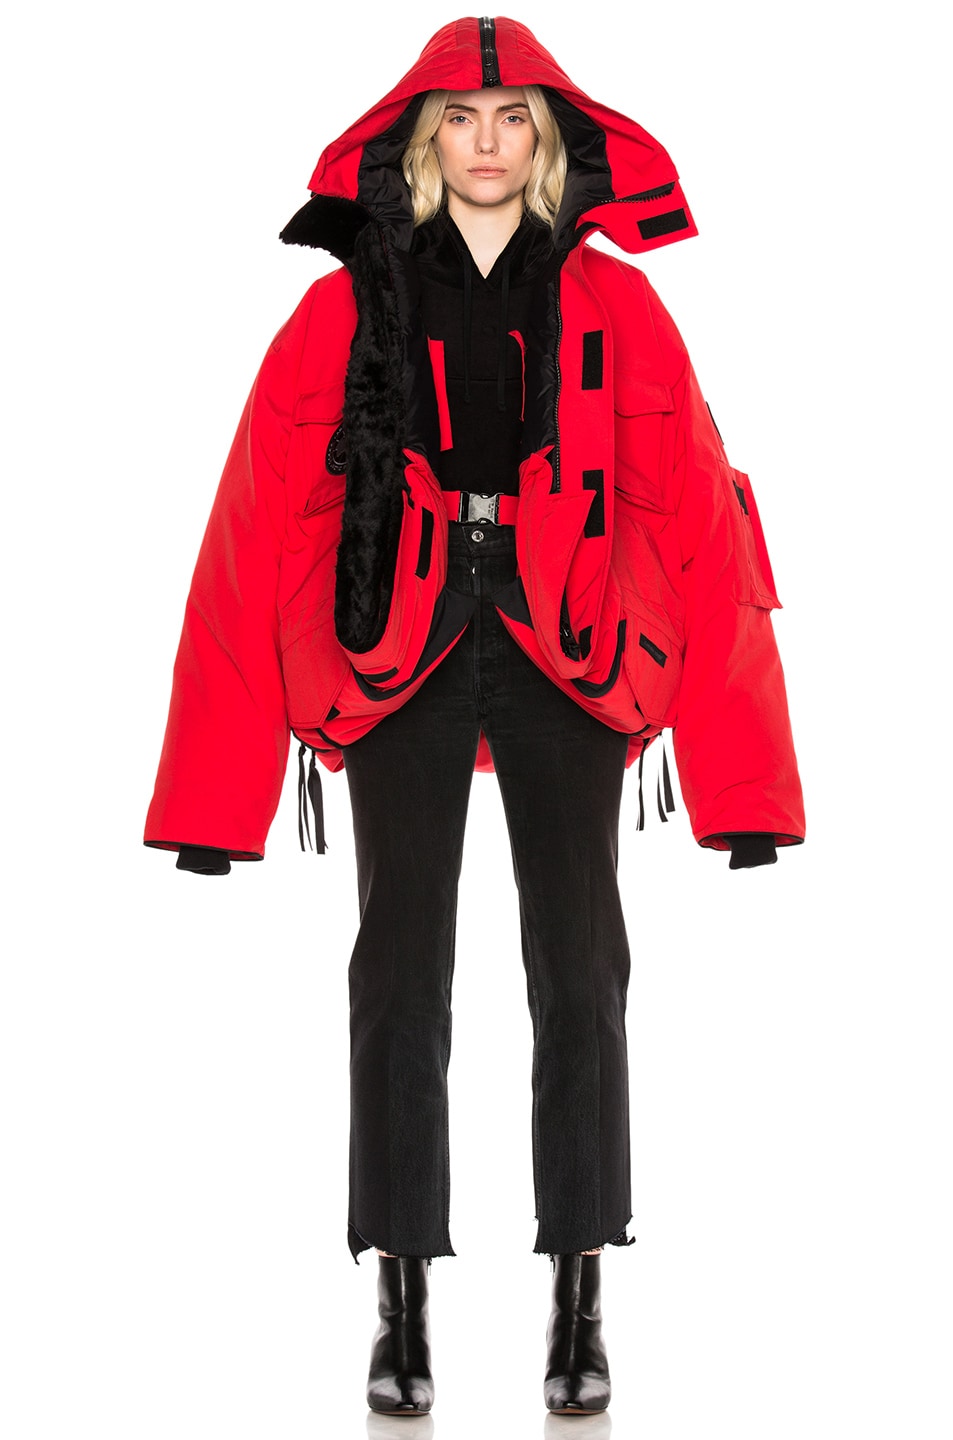 VETEMENTS x Canada Goose Oversized Fold Up Parka in Red | FWRD